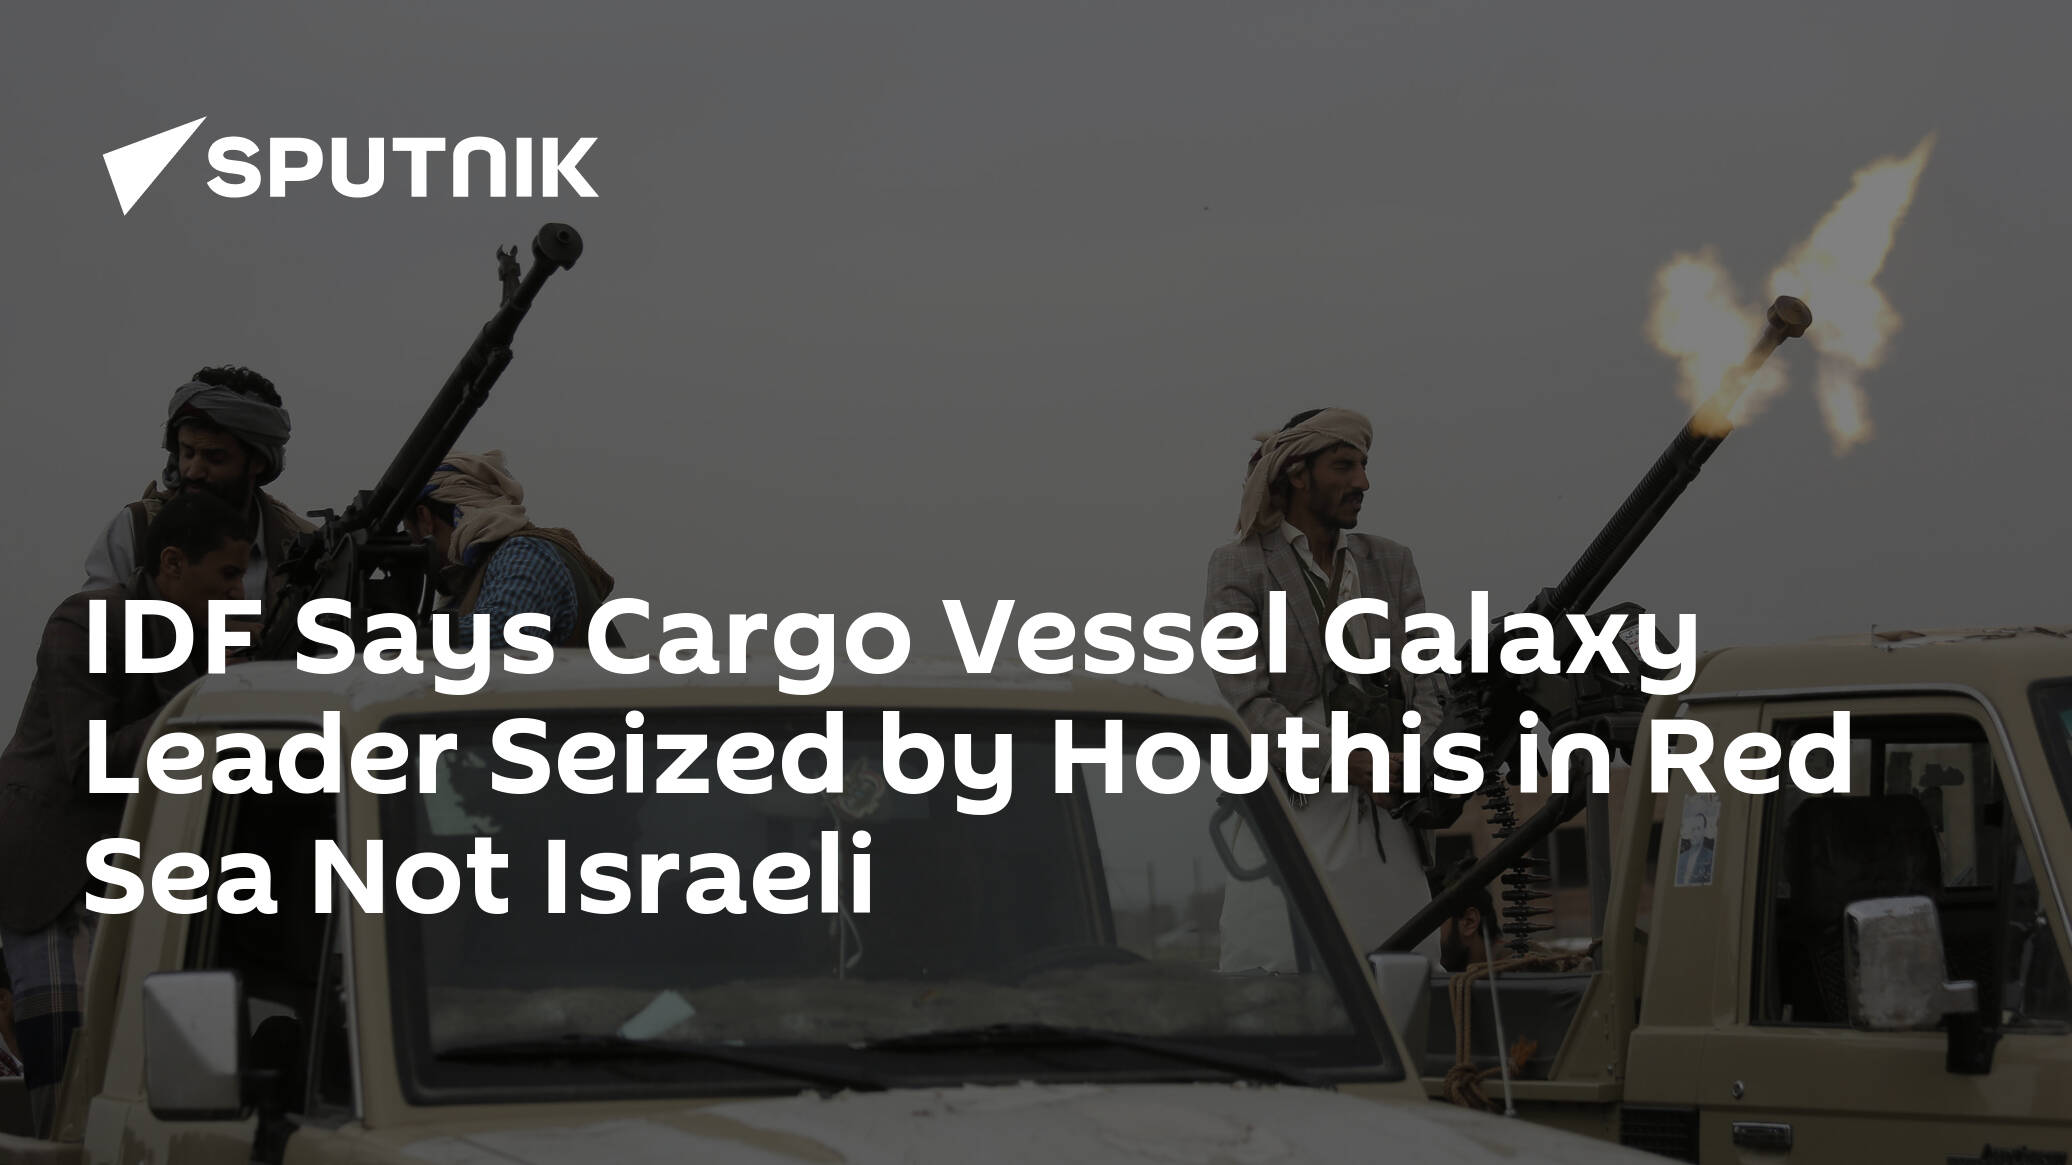 IDF Says Cargo Vessel Galaxy Leader Seized by Houthis in Red Sea Not Israeli